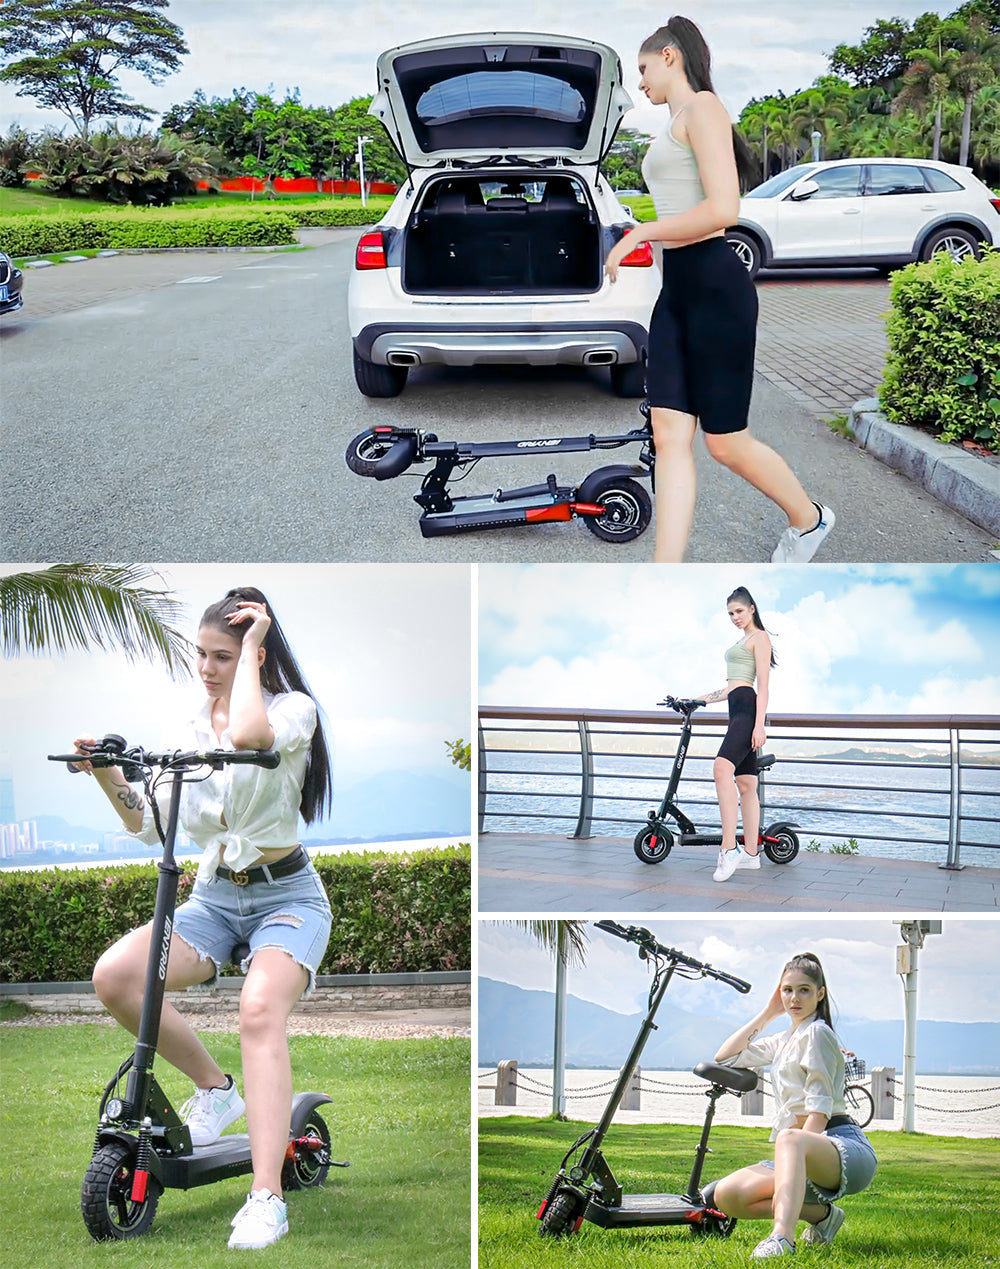 Ready to ship electric scooter usa uk eu stock iE kugoo M4 Pro 500watts Electric Scooter Max Speed 45 km/h kick electric scooter baby magazin 